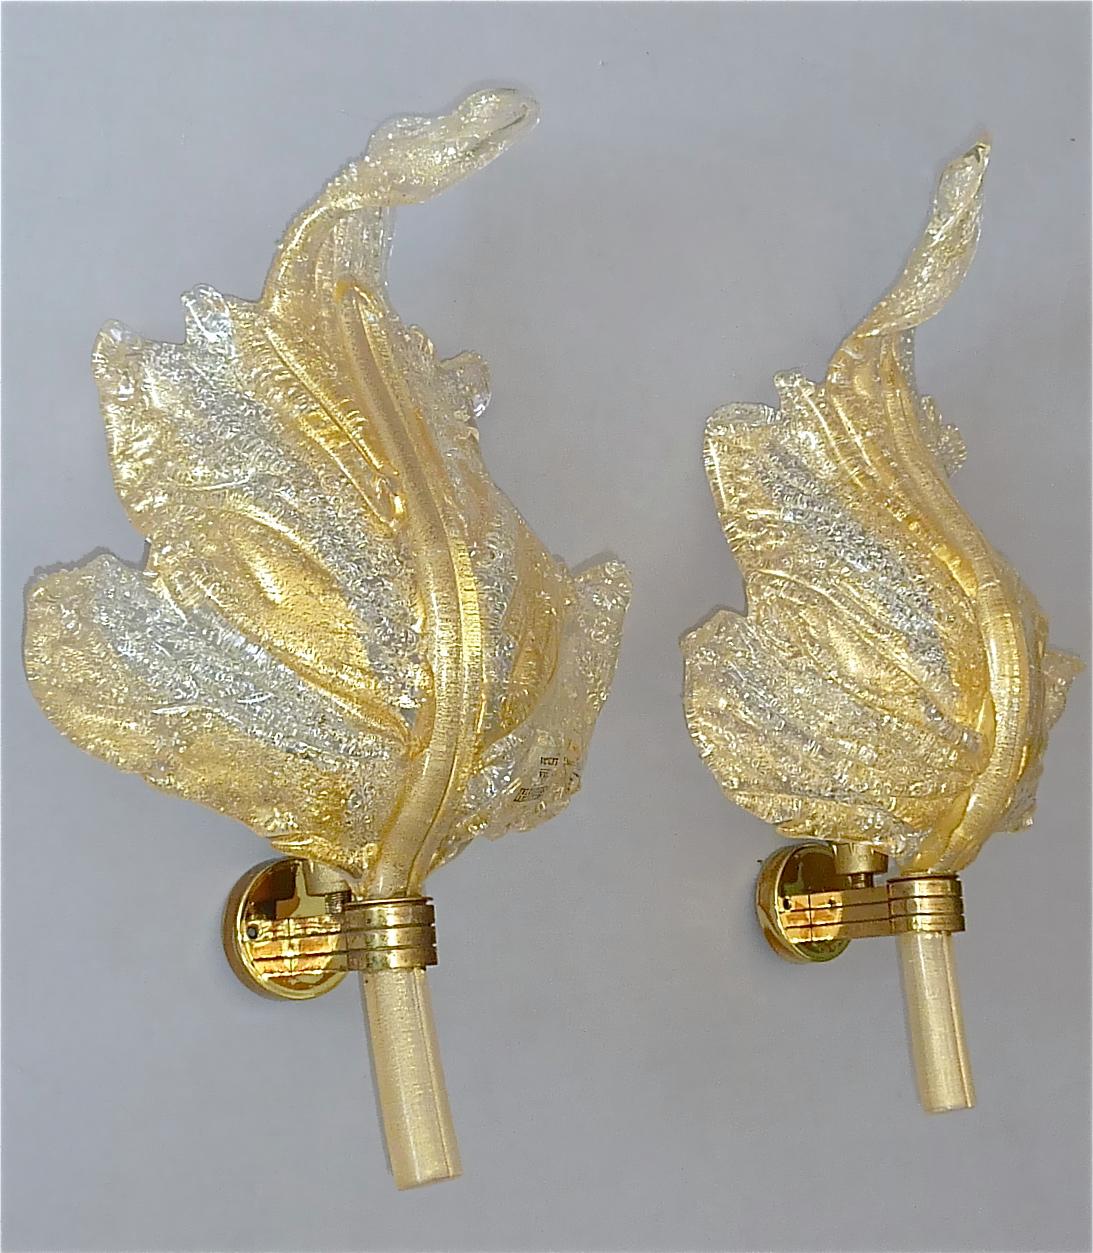 Large Signed Pair Barovier & Toso Leaf Sconces Italian Murano Glass Floral 1970s For Sale 5